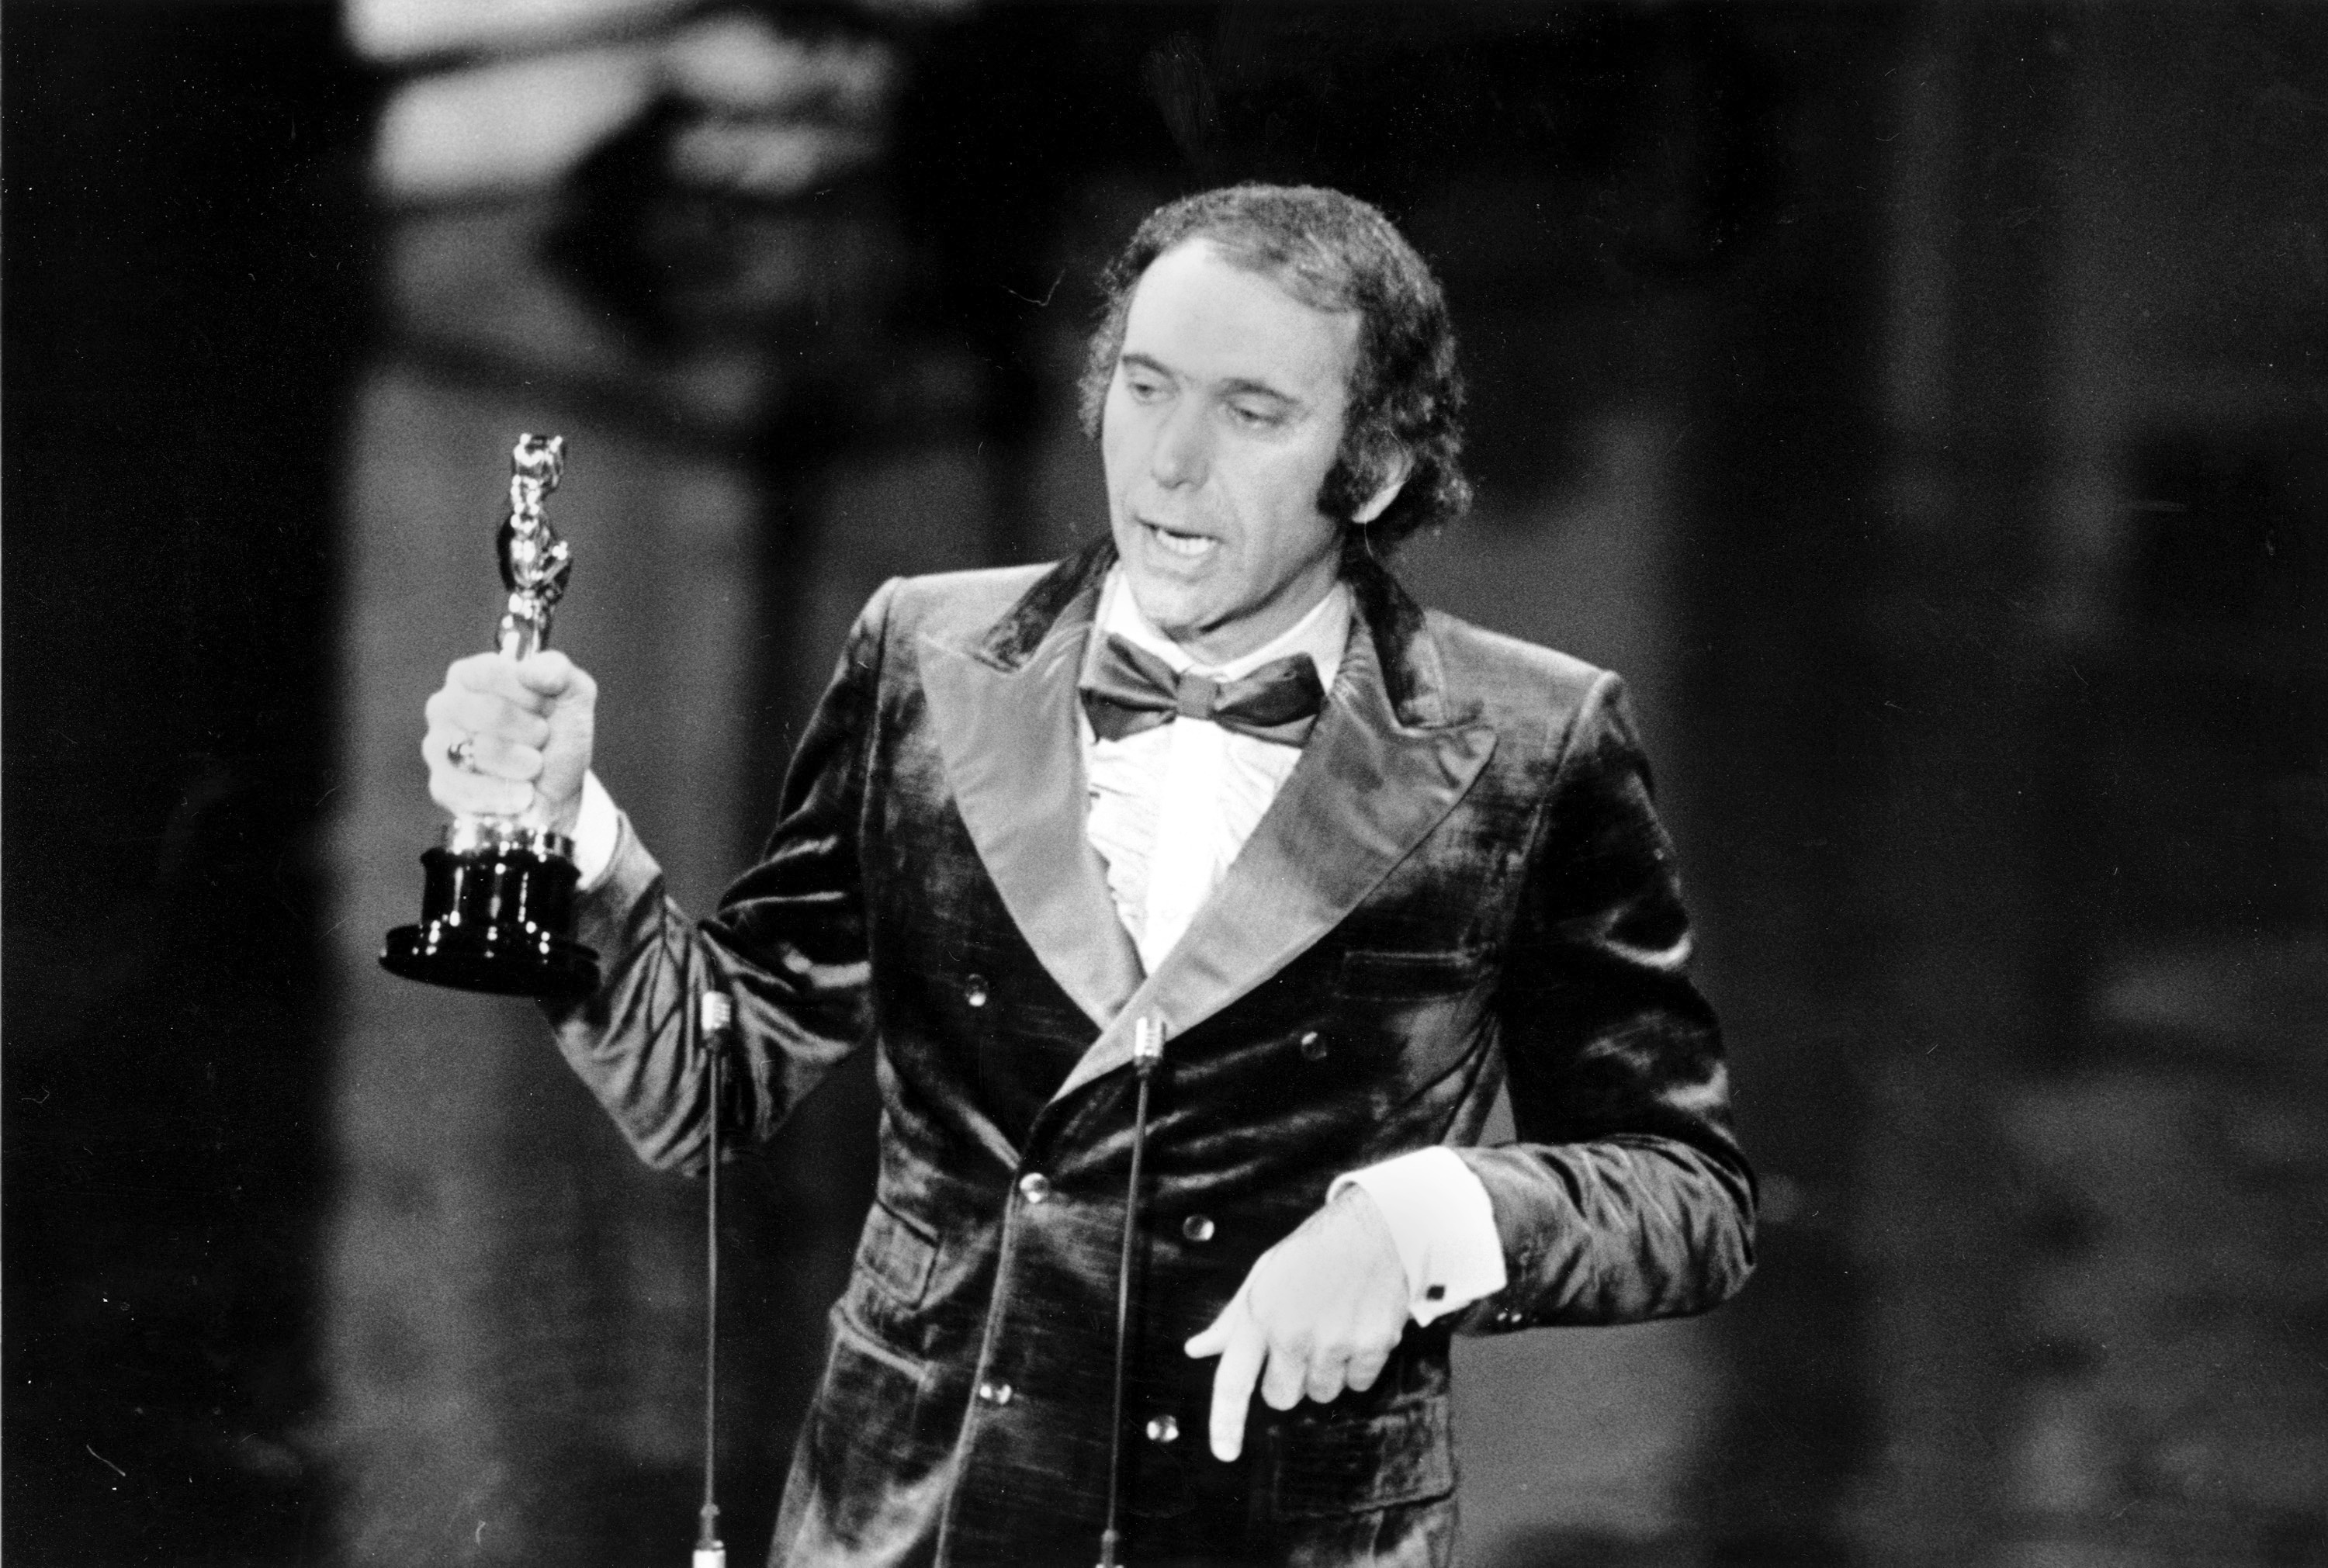 FILE - Producer Albert S. Ruddy accepts the Oscar for best picture for "The Godfather" at the 45th Annual Academy Awards ceremony in Los Angeles, Calif., on March 27, 1973. The Canadian-born producer and writer who won Oscars for “The Godfather” and “Million Dollar Baby,” died Saturday, May 25, 2024, at age 94. (AP Photo, File)